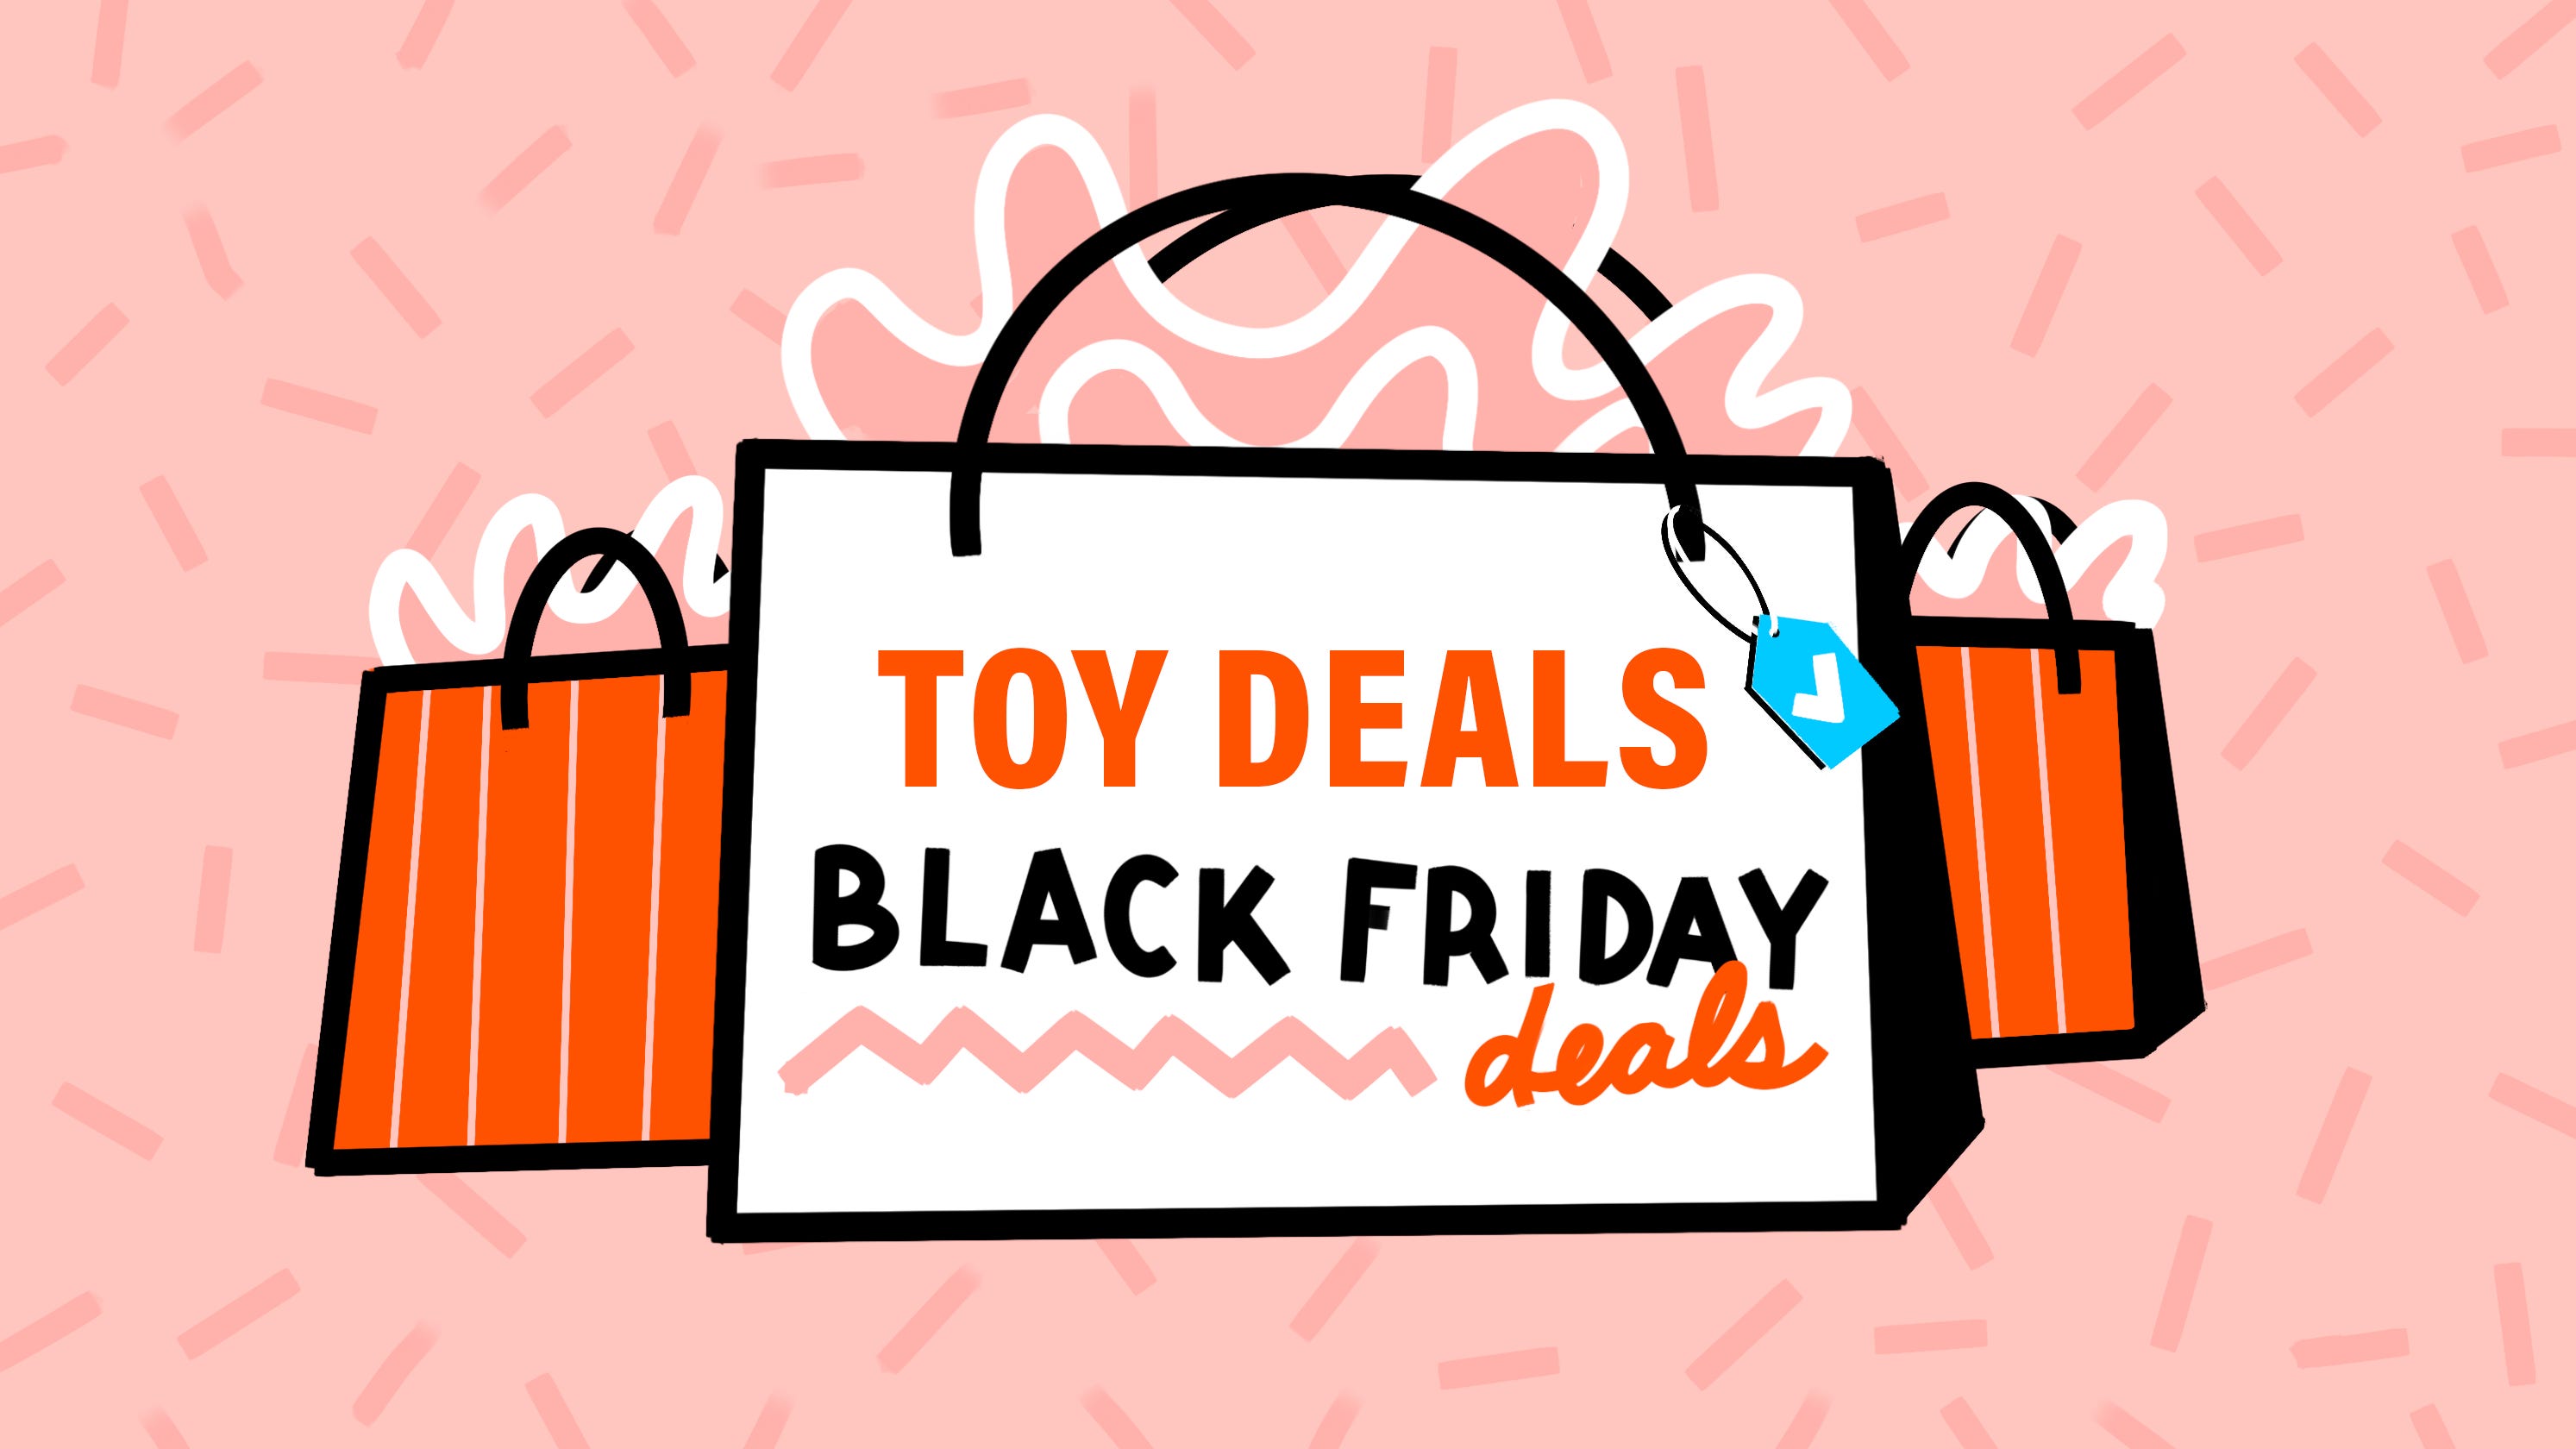 100+ Black Friday Toy Deals Best sales on toys, games, gifts